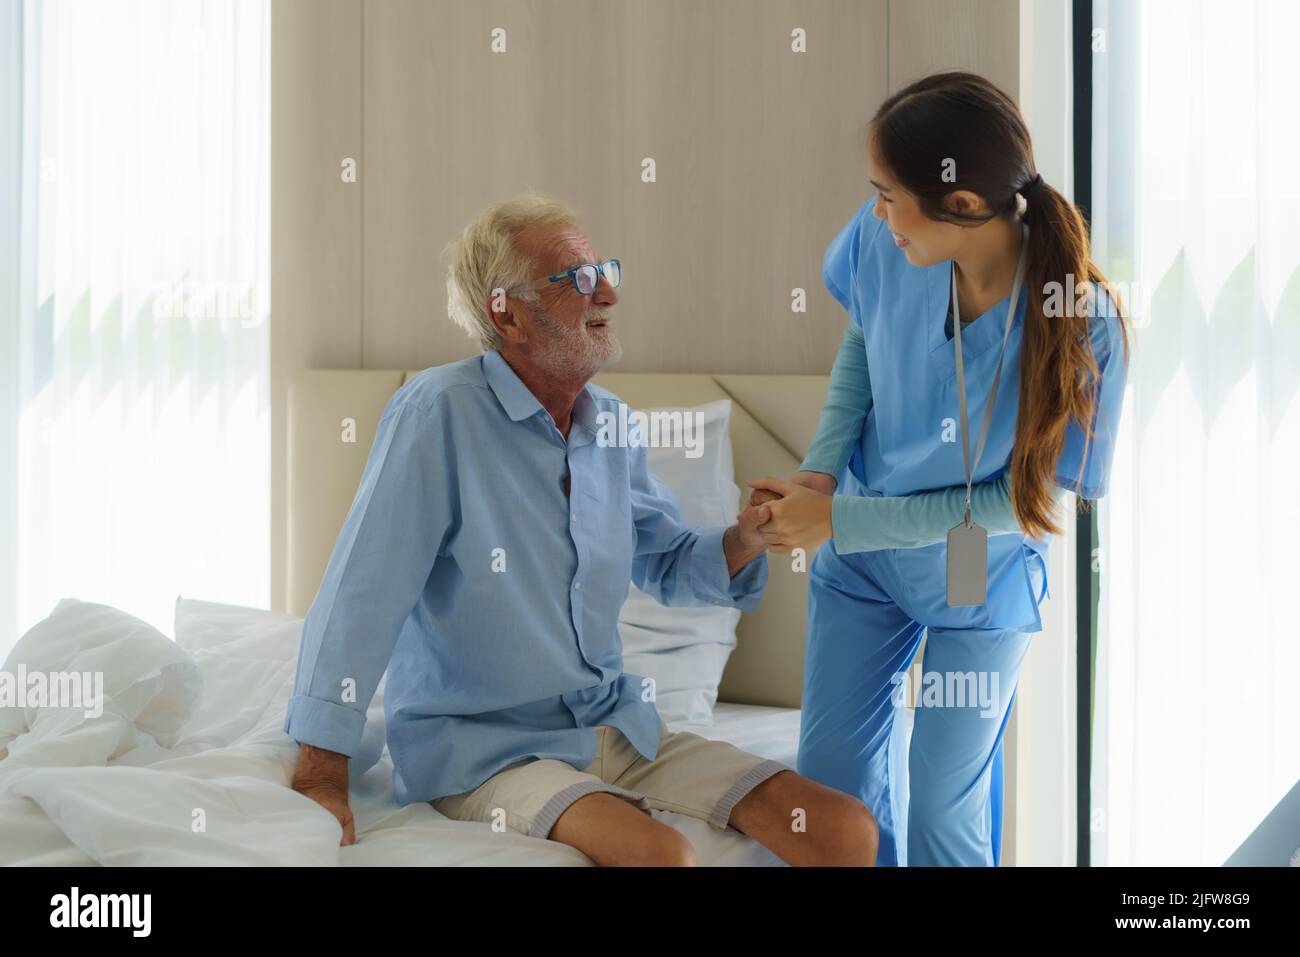 Asian nurse standing on a home bed next to an older man helping hands, care. Elderly patient care and health lifestyle, medical concept. Stock Photo